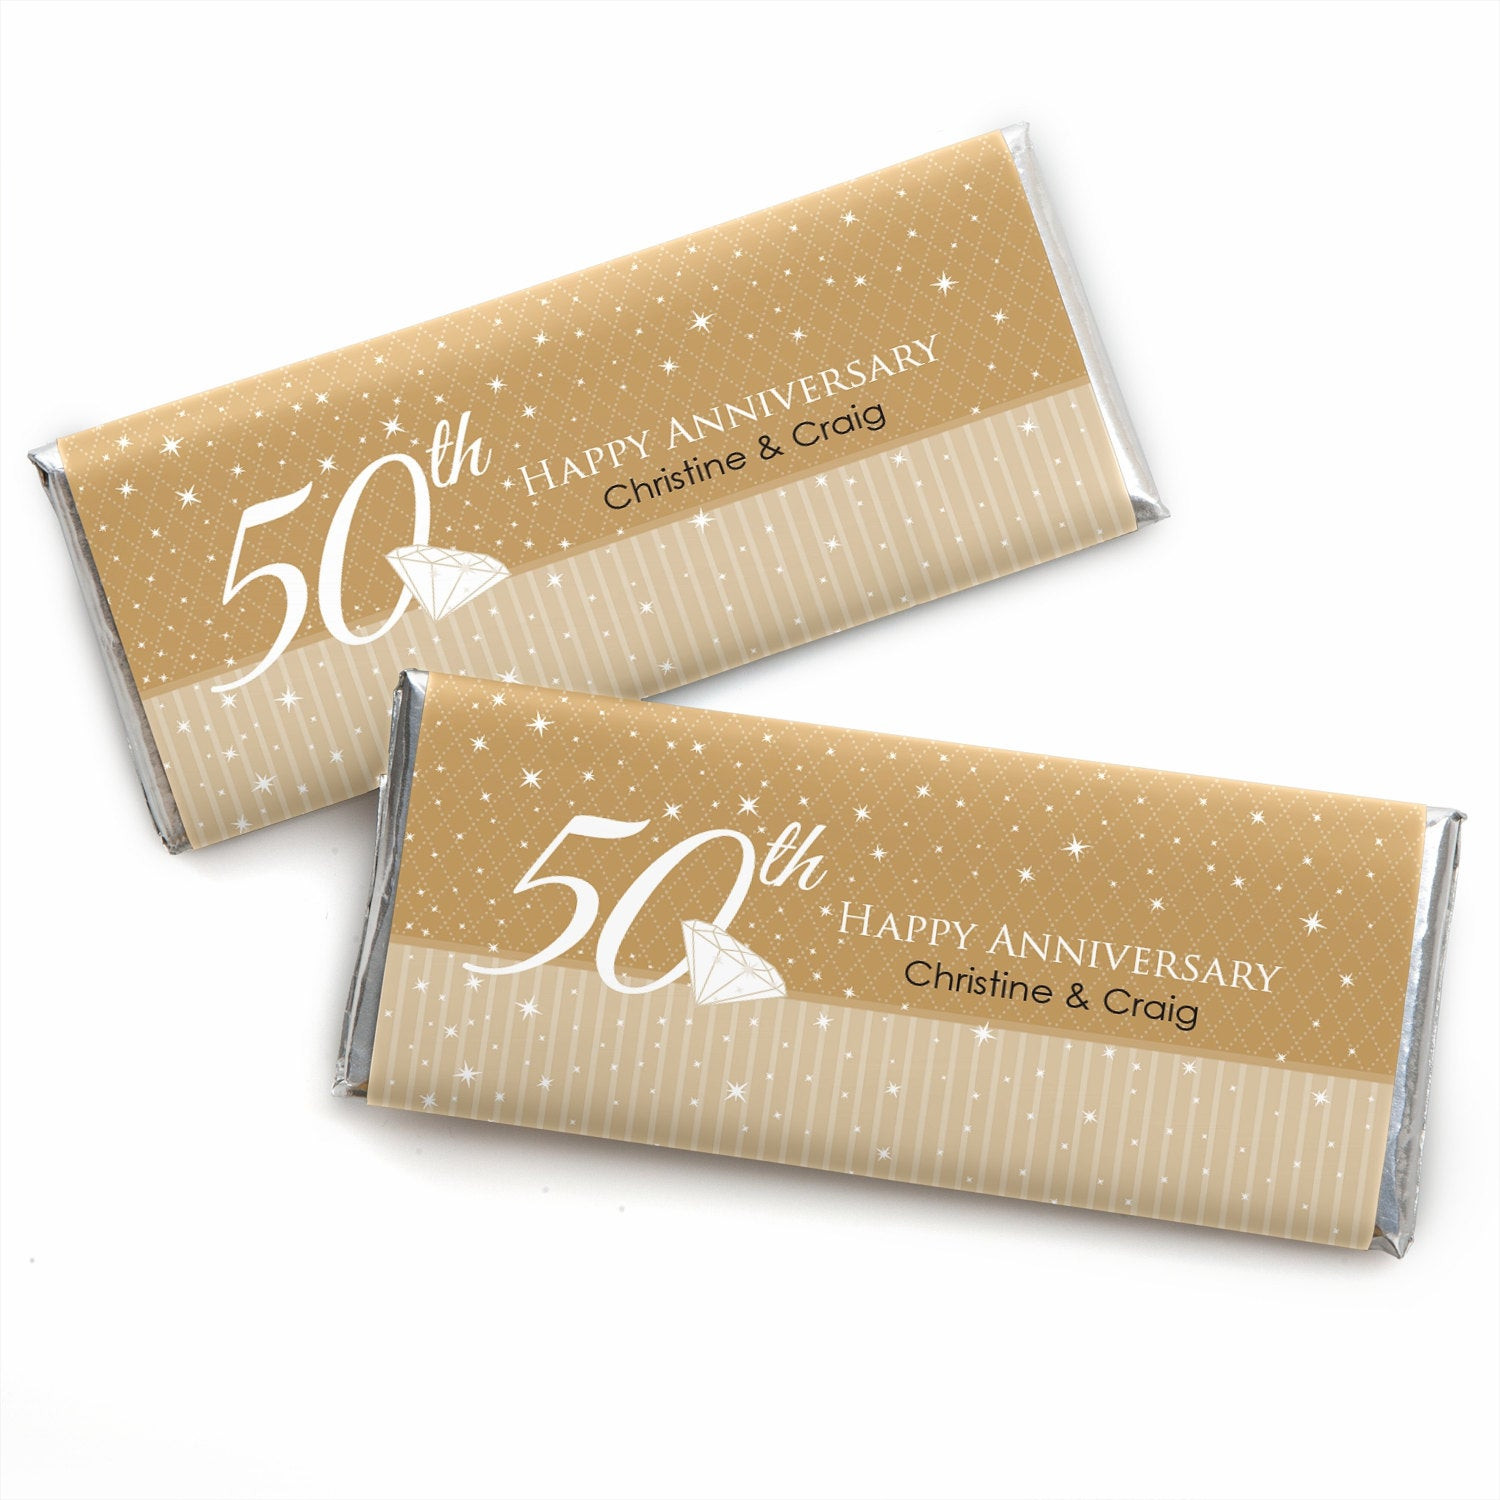 50th Wedding Anniversary Favors
 50th Anniversary Custom Candy Bar Wrappers Personalized